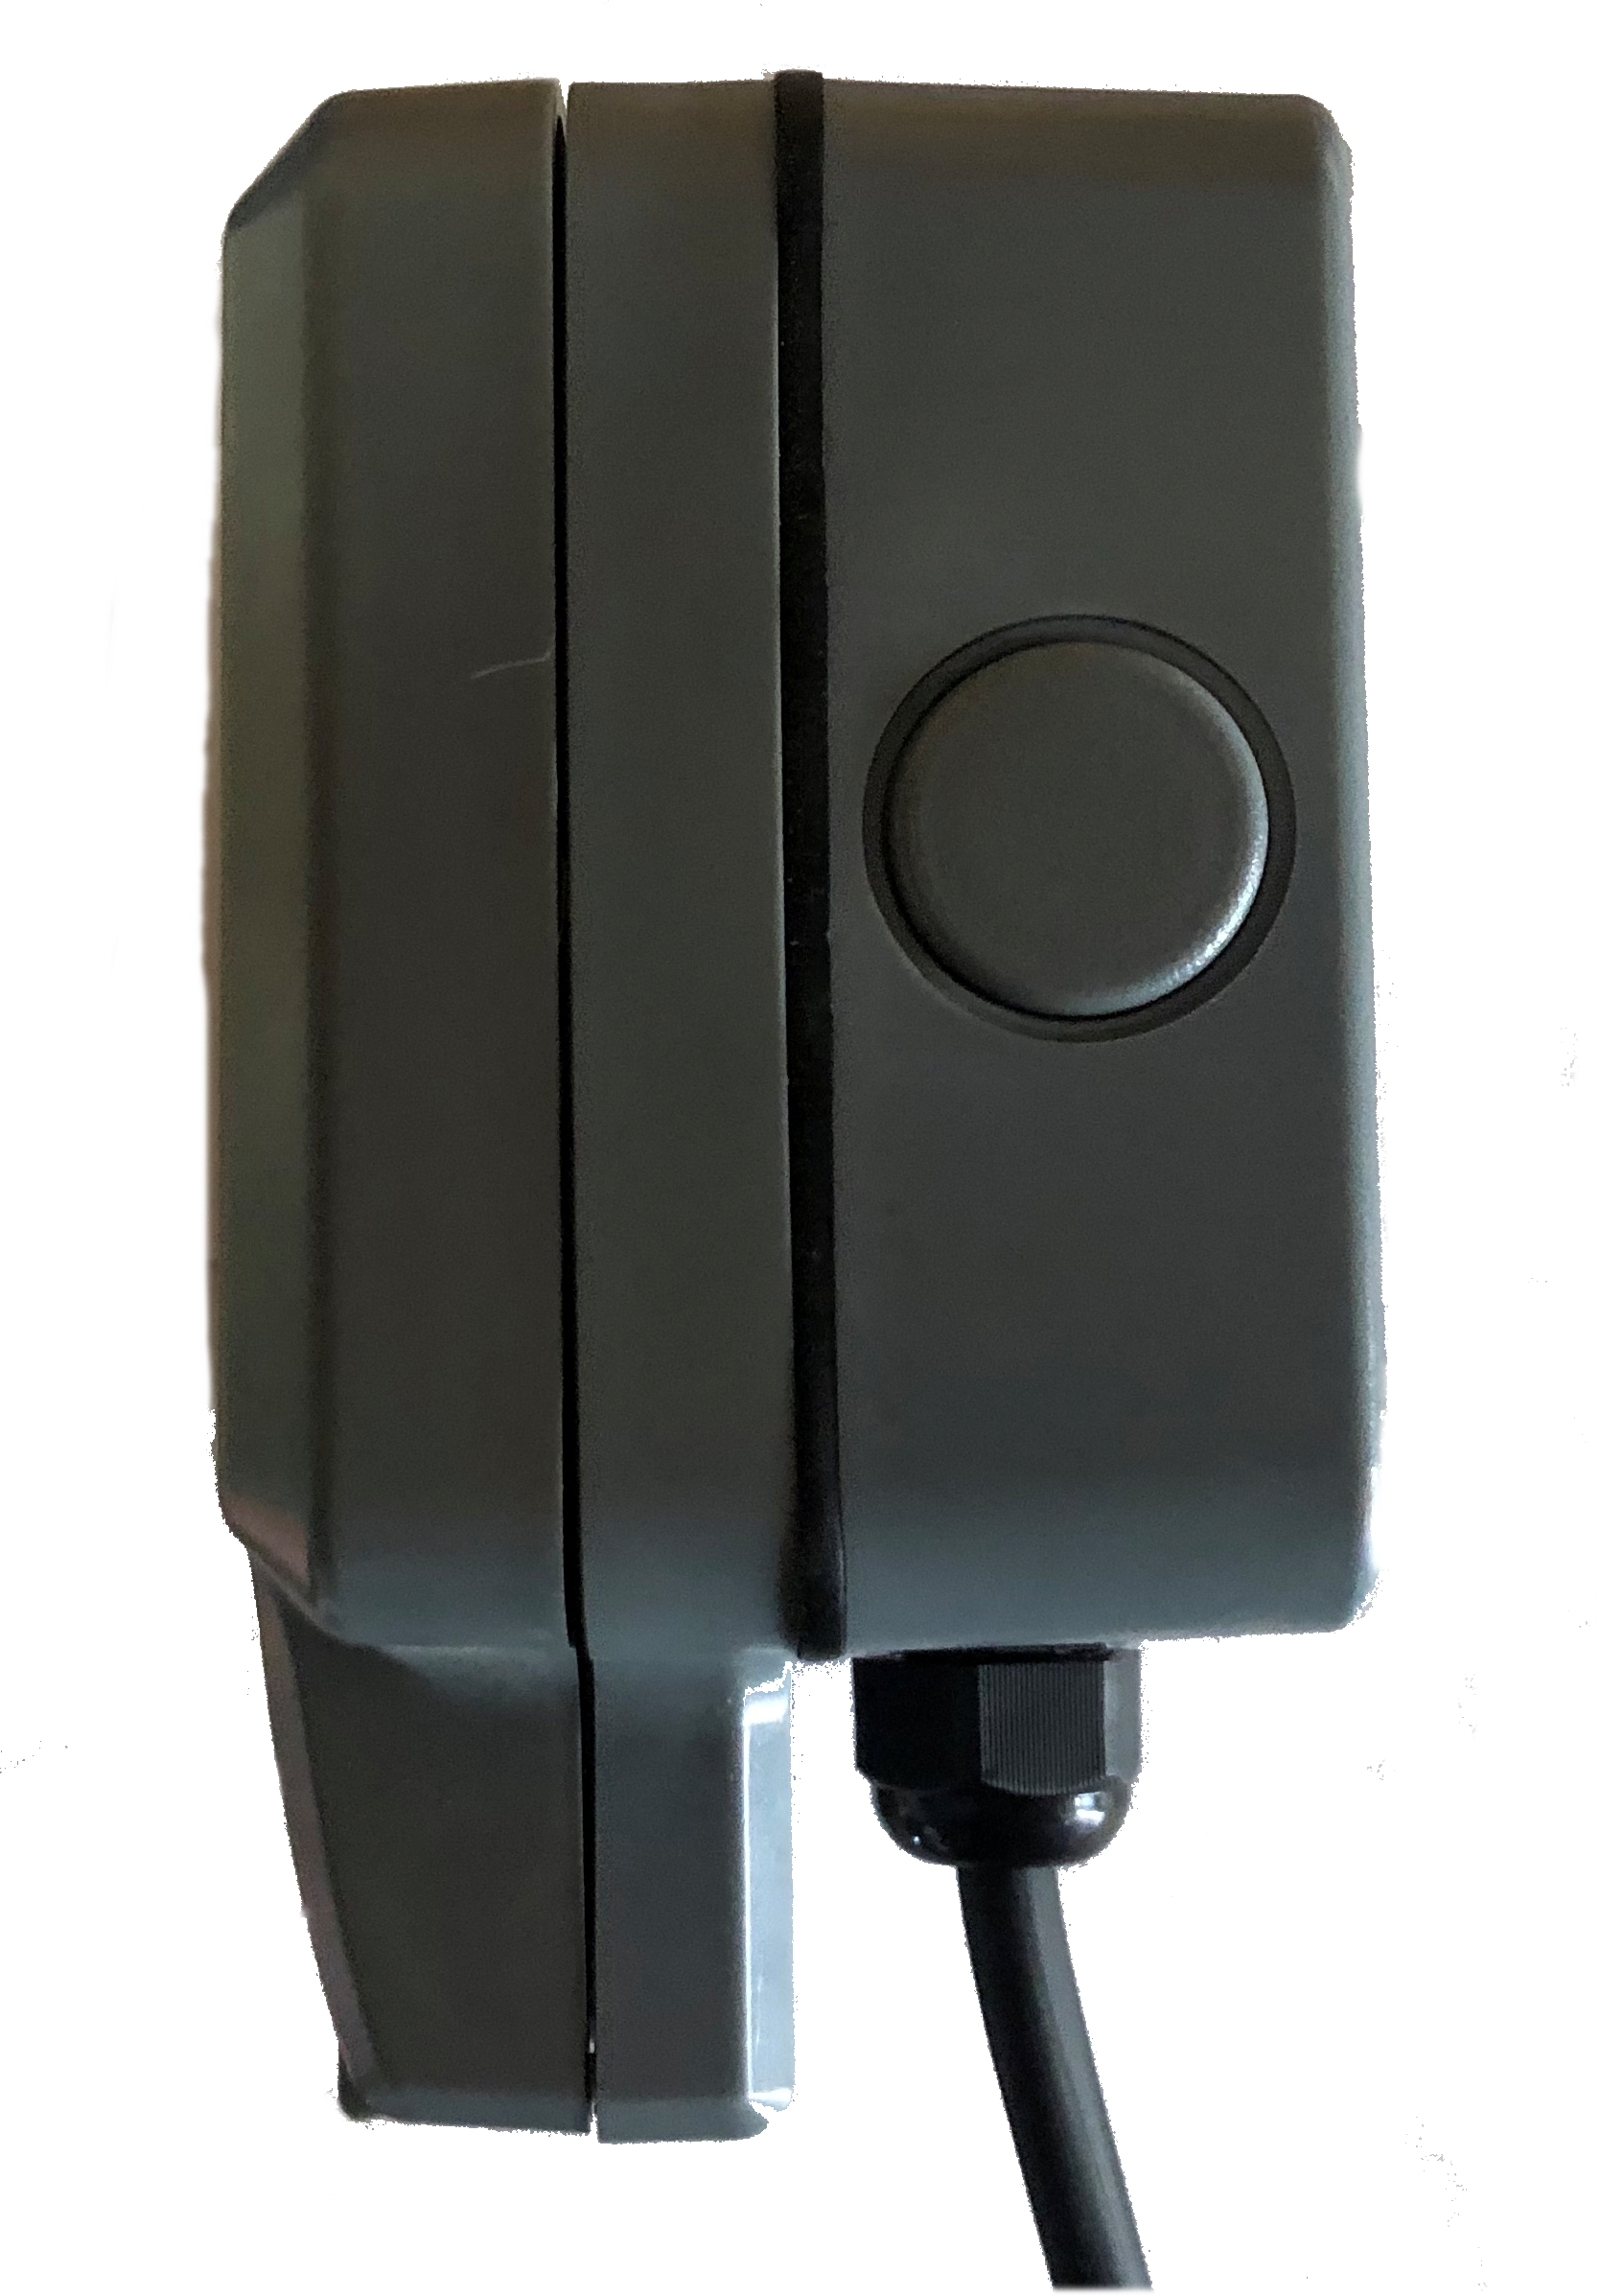 Outdoor garden extension lead socket box IP65 Rated with Black Cable